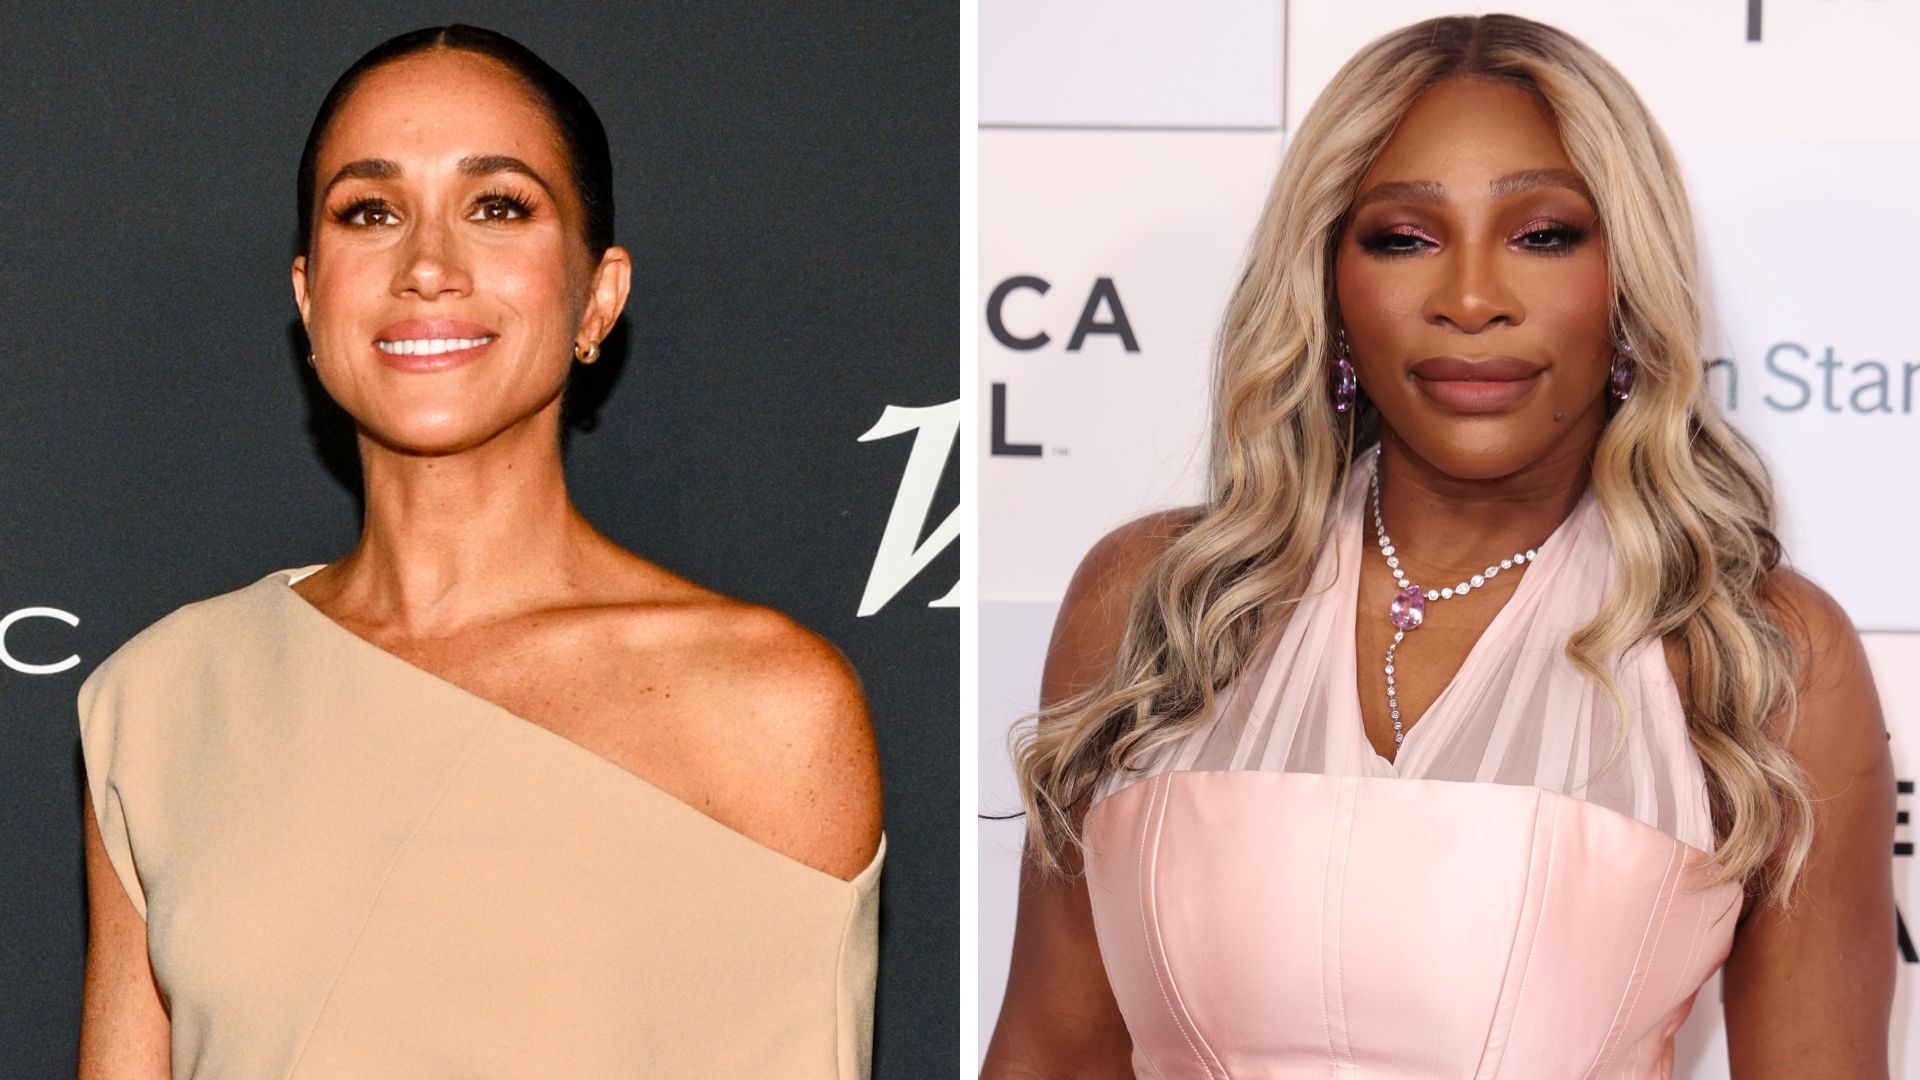 Split image of Meghan Markle (left) and Serena Williams (right)